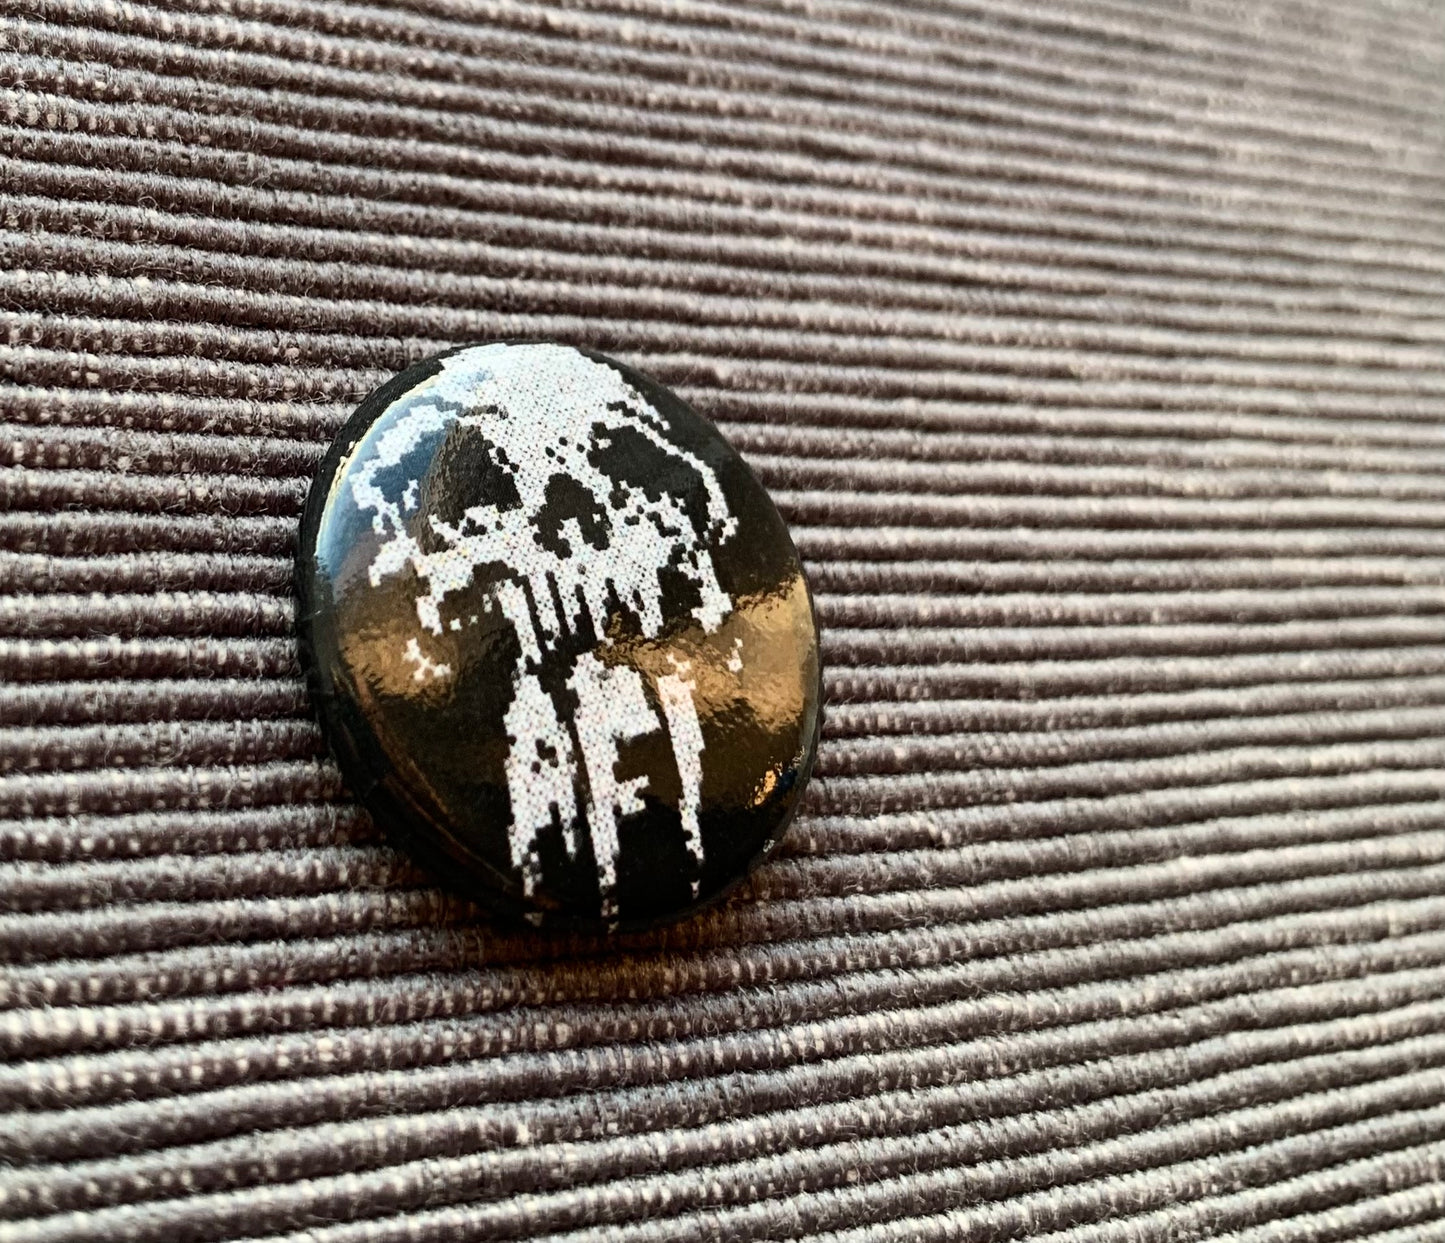 AFI skull pinback button, closeup, against a grey textured background.